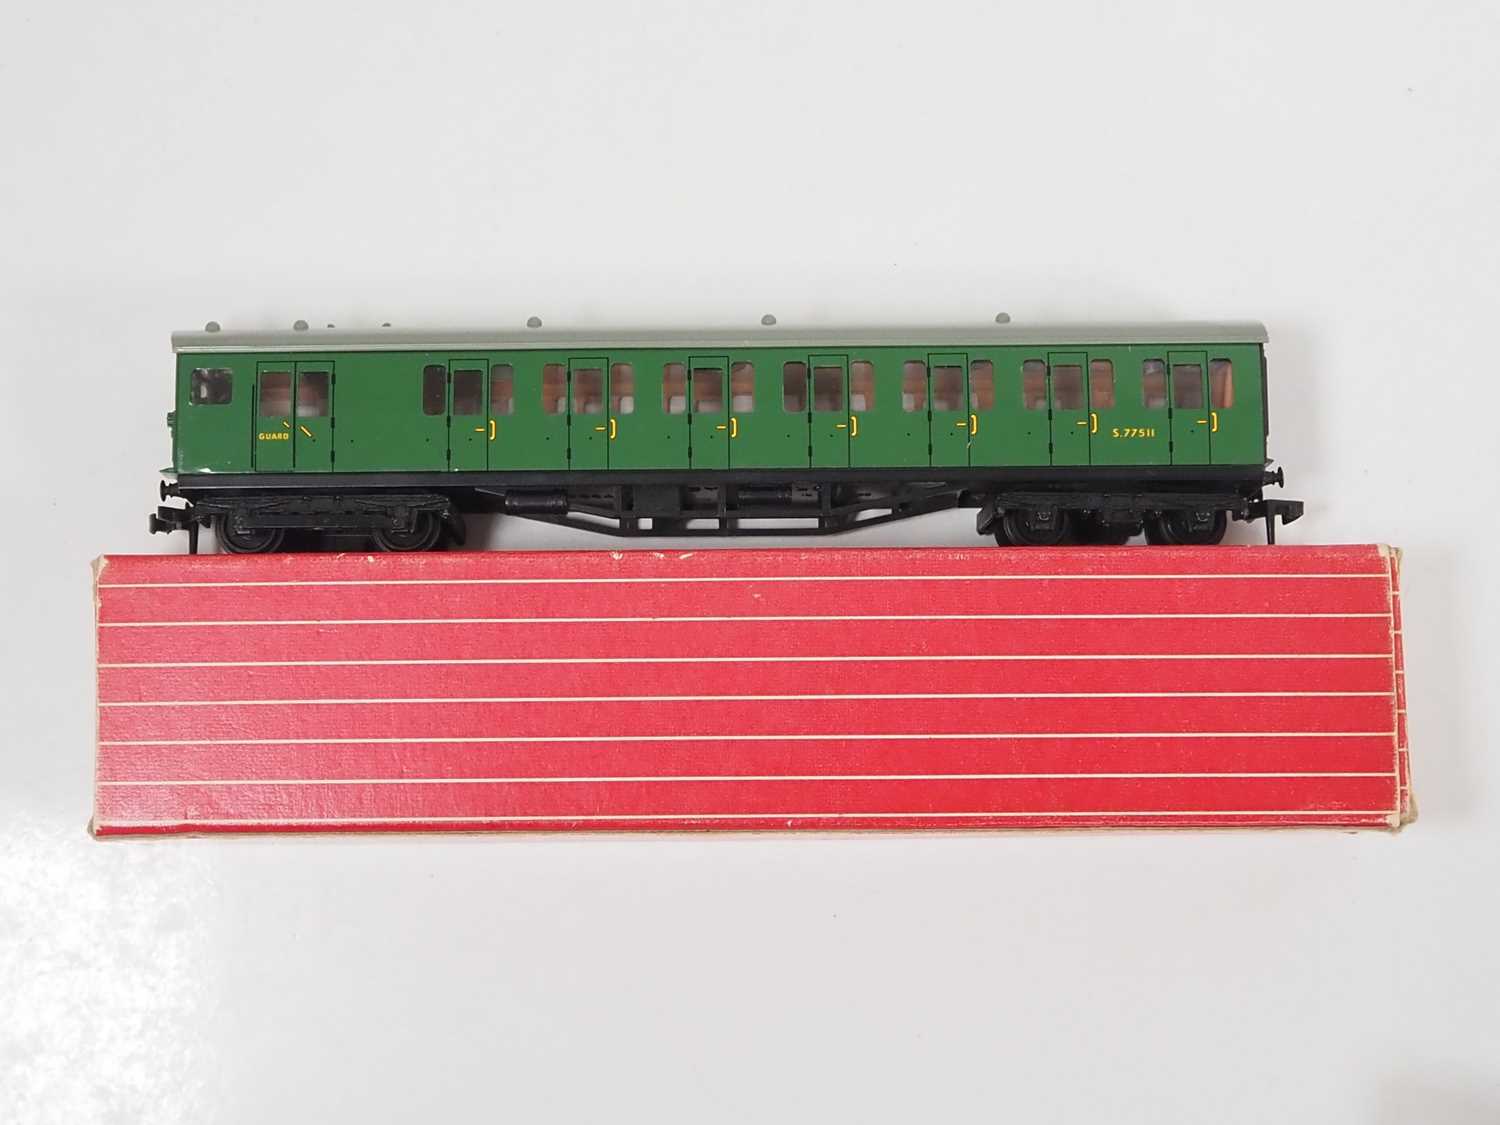 A HORNBY DUBLO 3250/4150 3-rail OO gauge BR(S) Electric Motor Coach with Driving Trailer 2 car EMU - Image 2 of 9